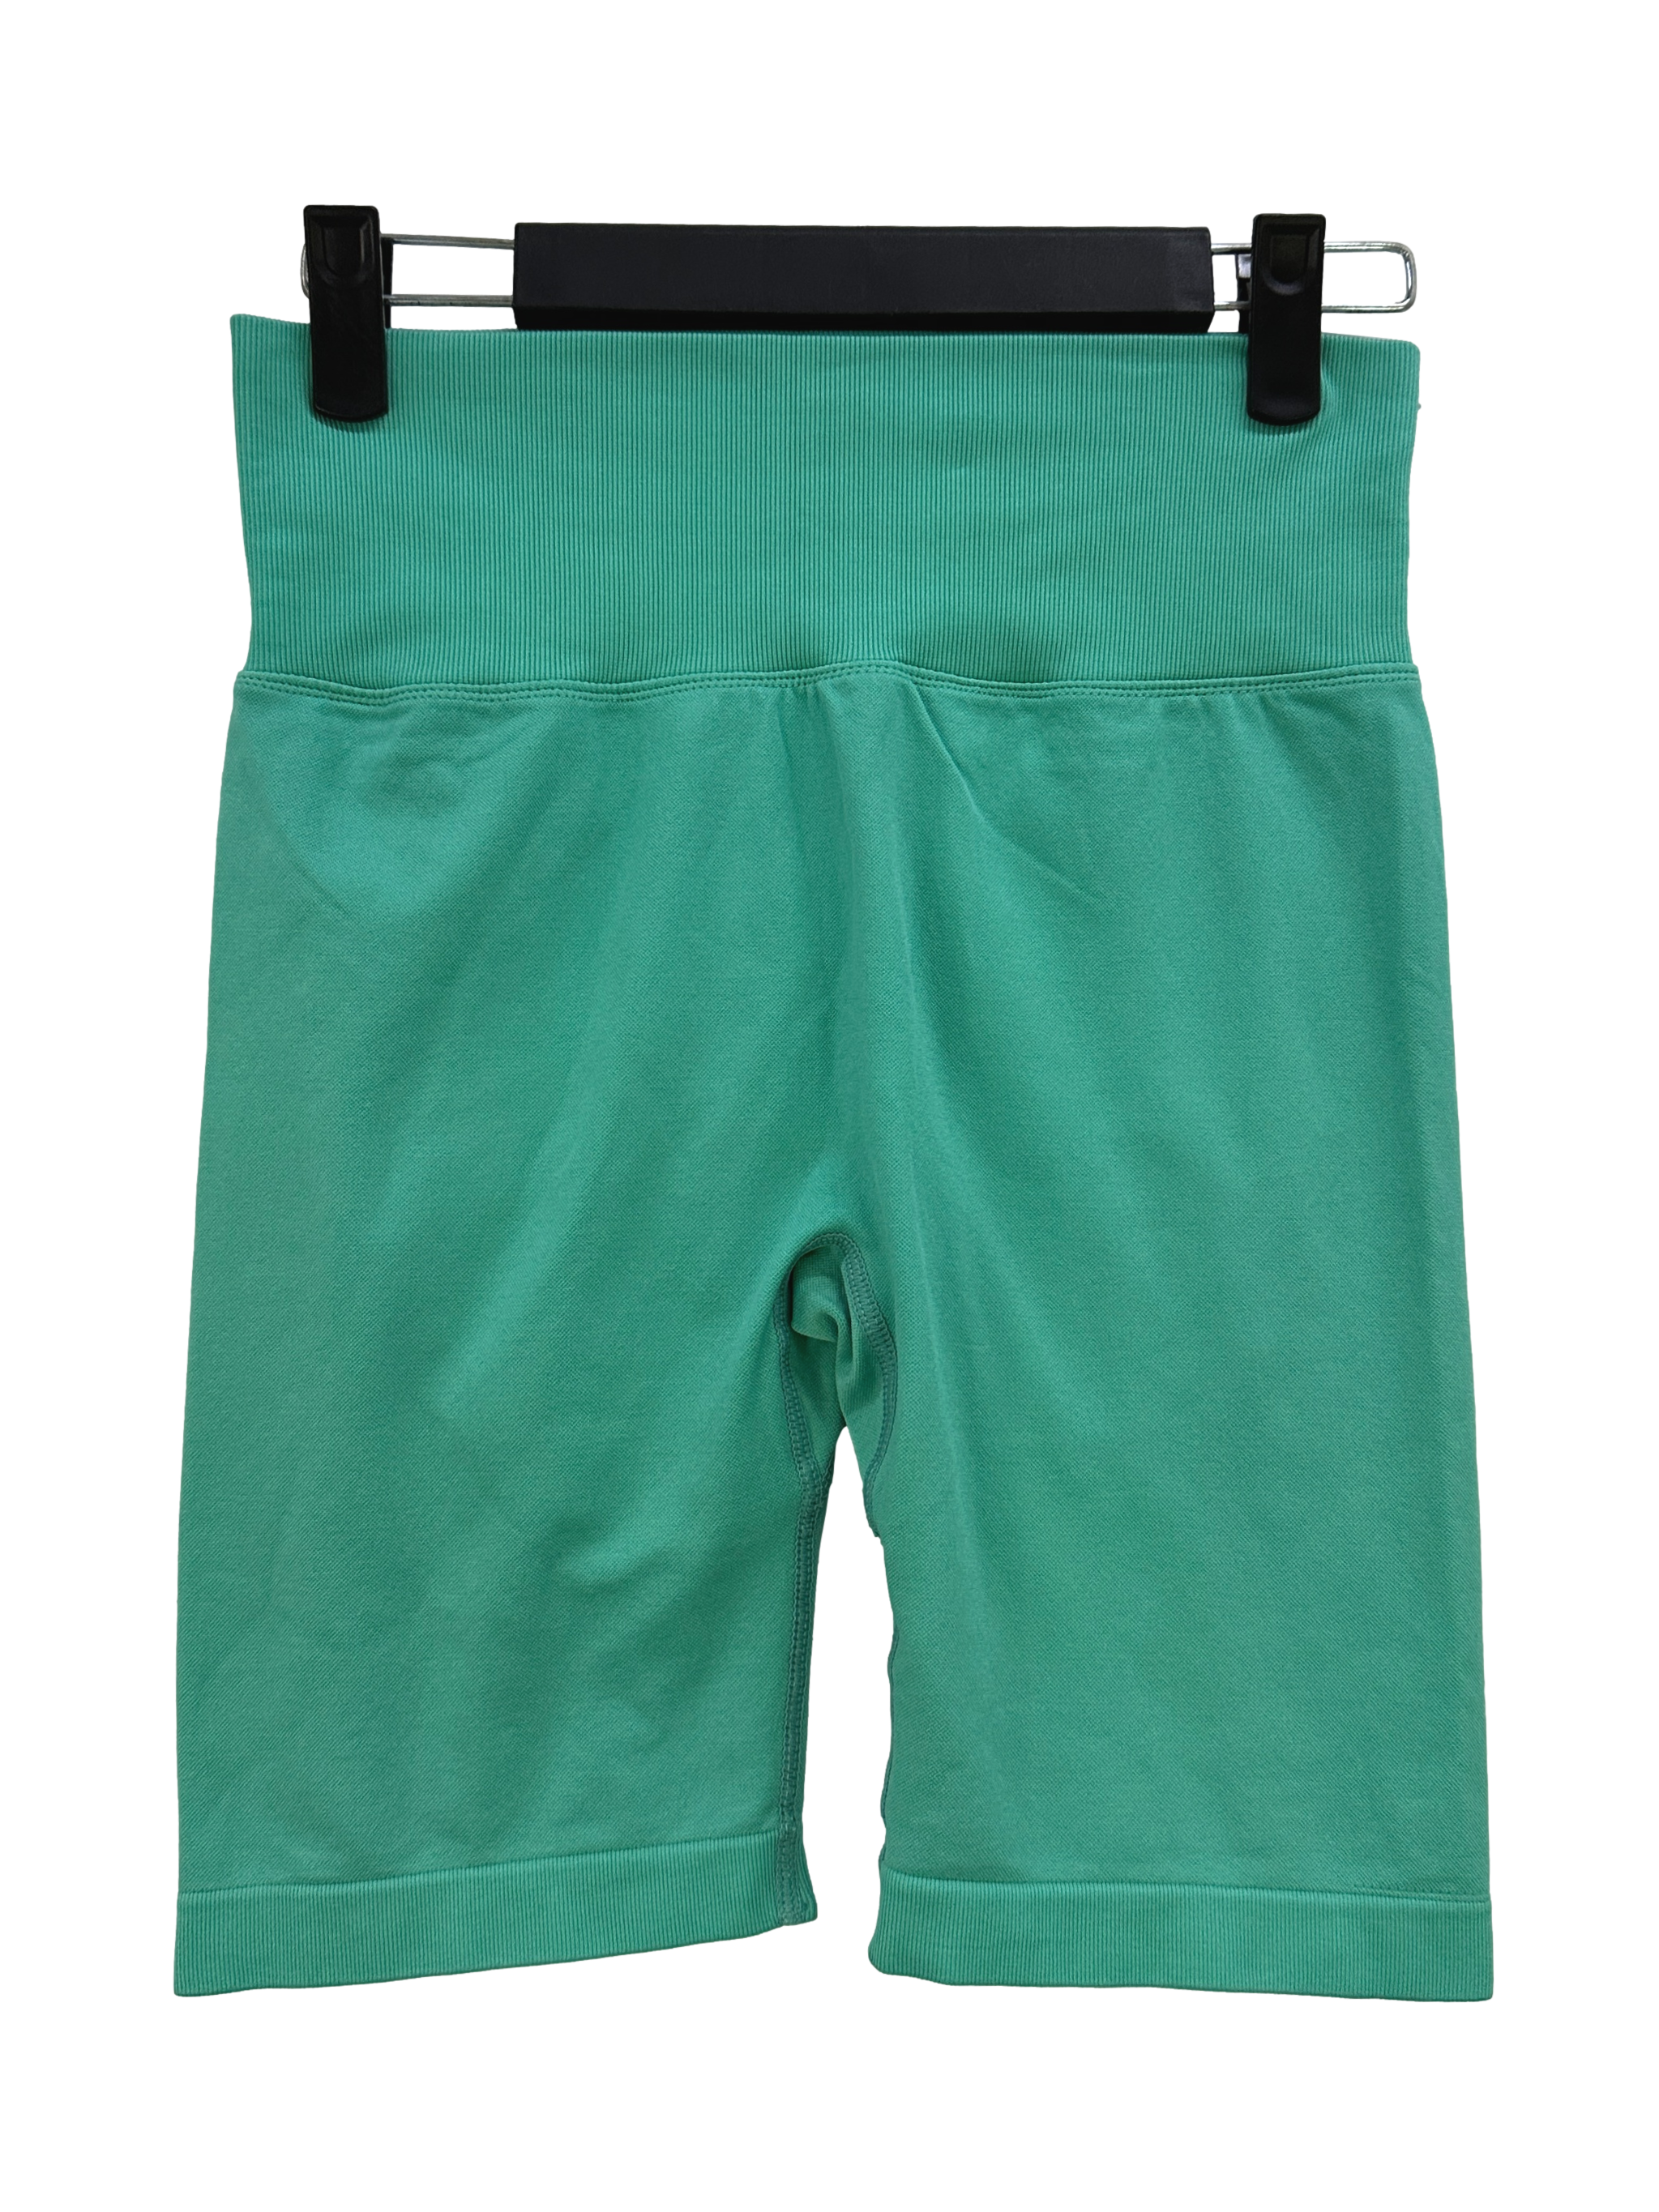 Turquoise High-Waisted Ruched Bicycle Shorts